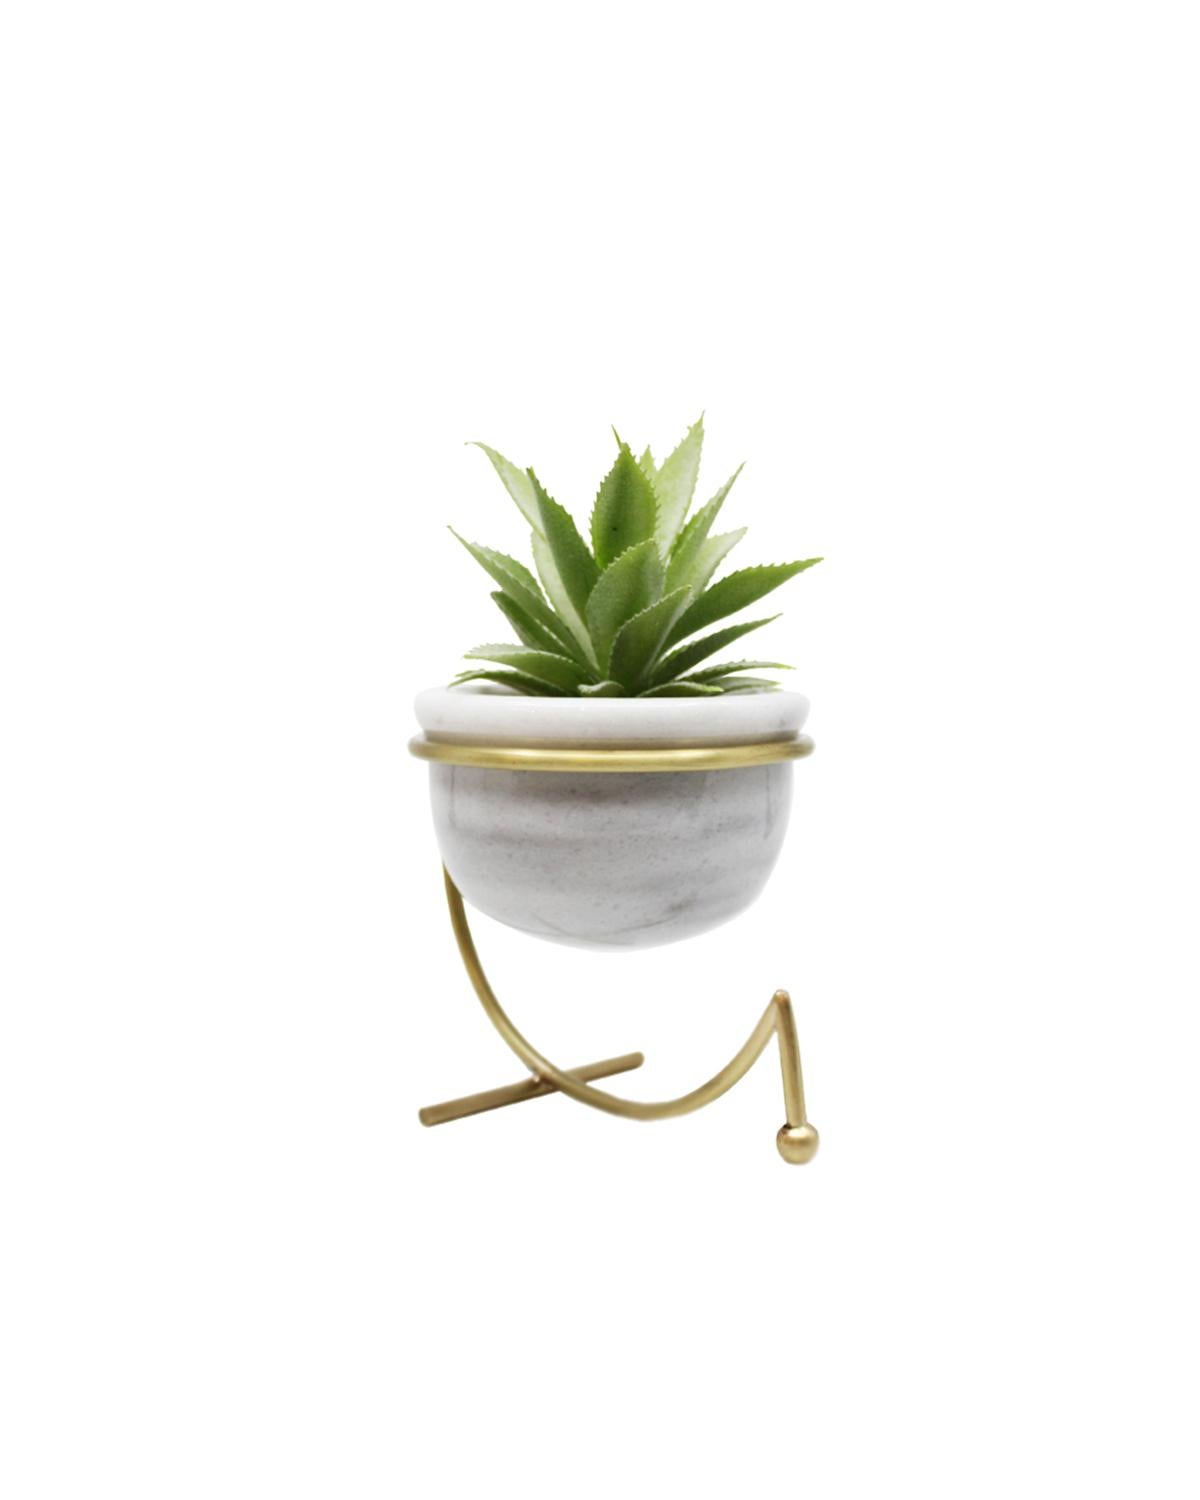 Brook bowl/vase by Studio Laf
Dimensions: W: 13 cm Height: 14 cm R: 12 cm
Materials: Brass, marble.


Brook, which has two functions as flowerpot and appetizer bowl, is formed by completely handcrafted brass and marble material. Designed by